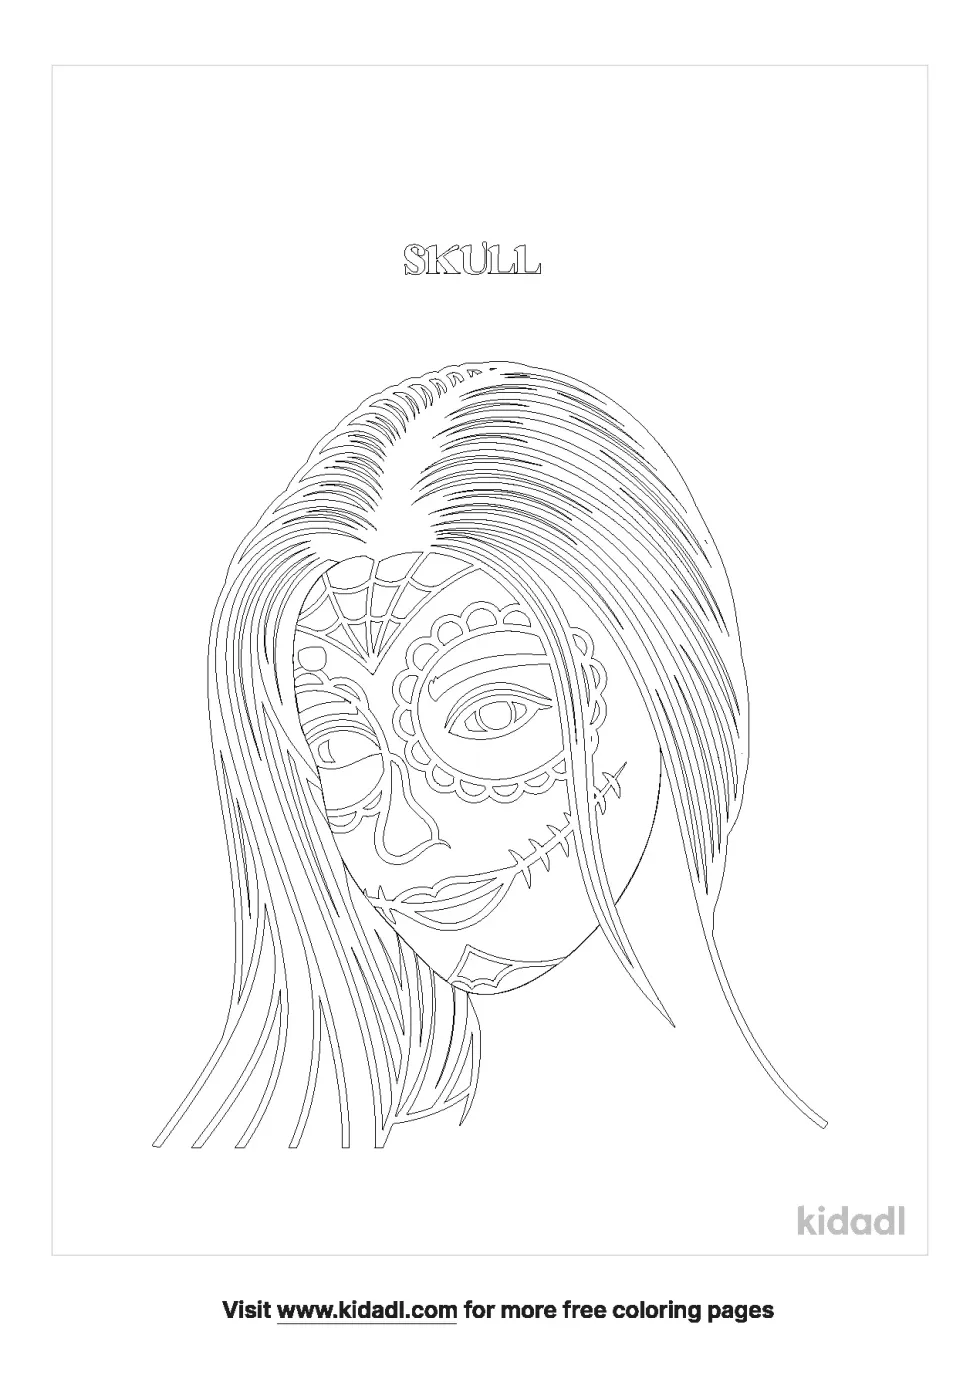 Skull With Hair Coloring Page